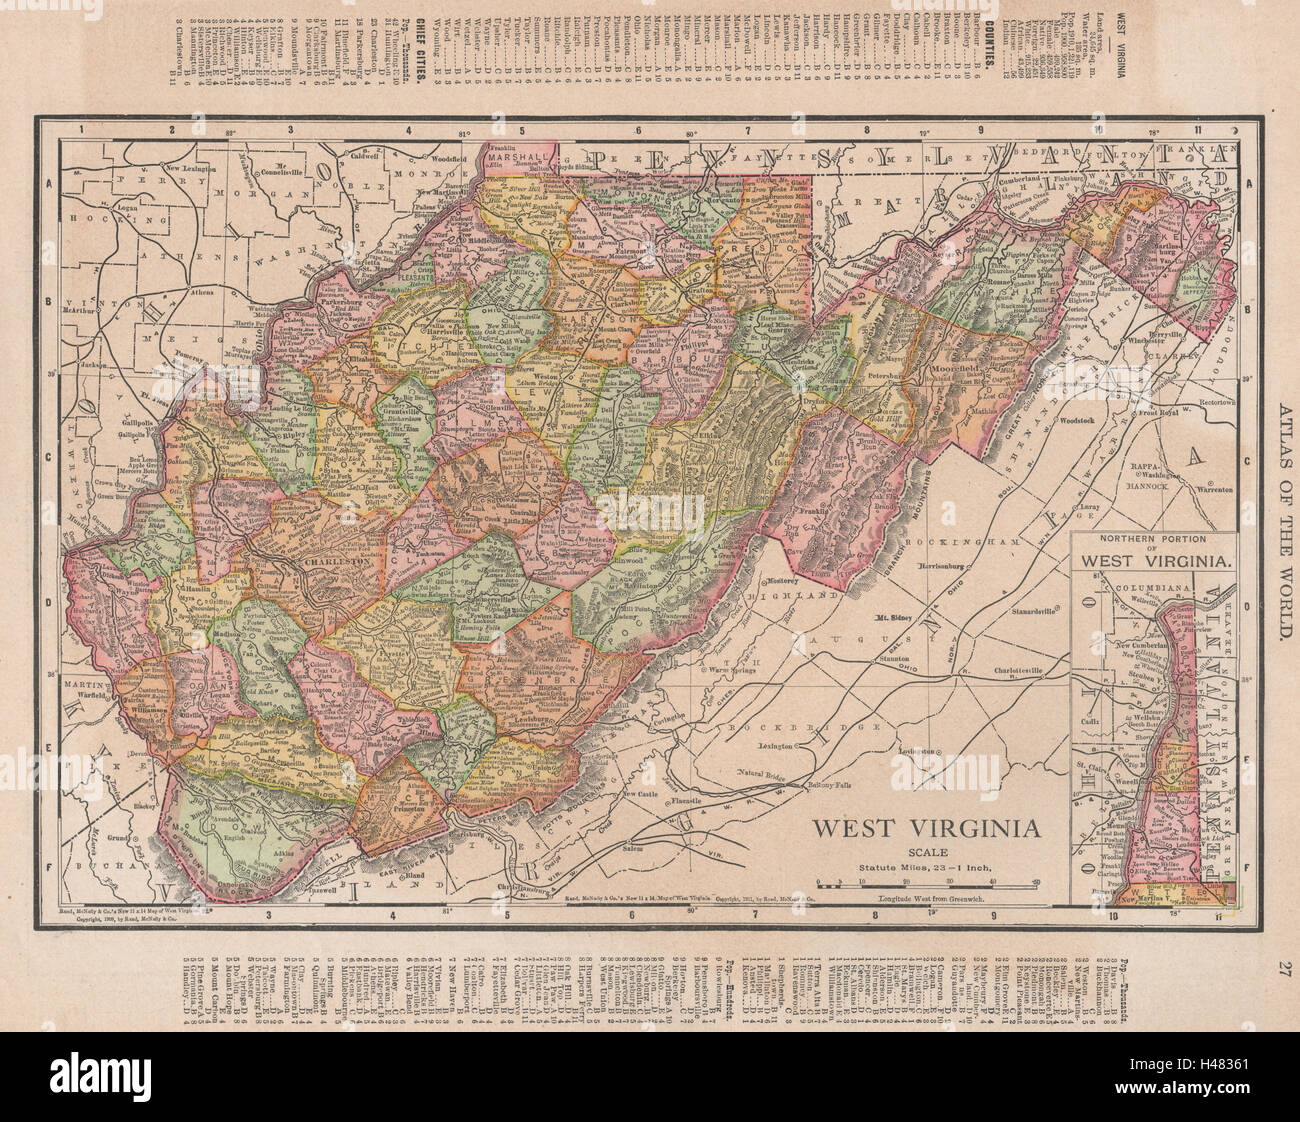 West Virginia state map showing counties. RAND MCNALLY 1912 old antique Stock Photo